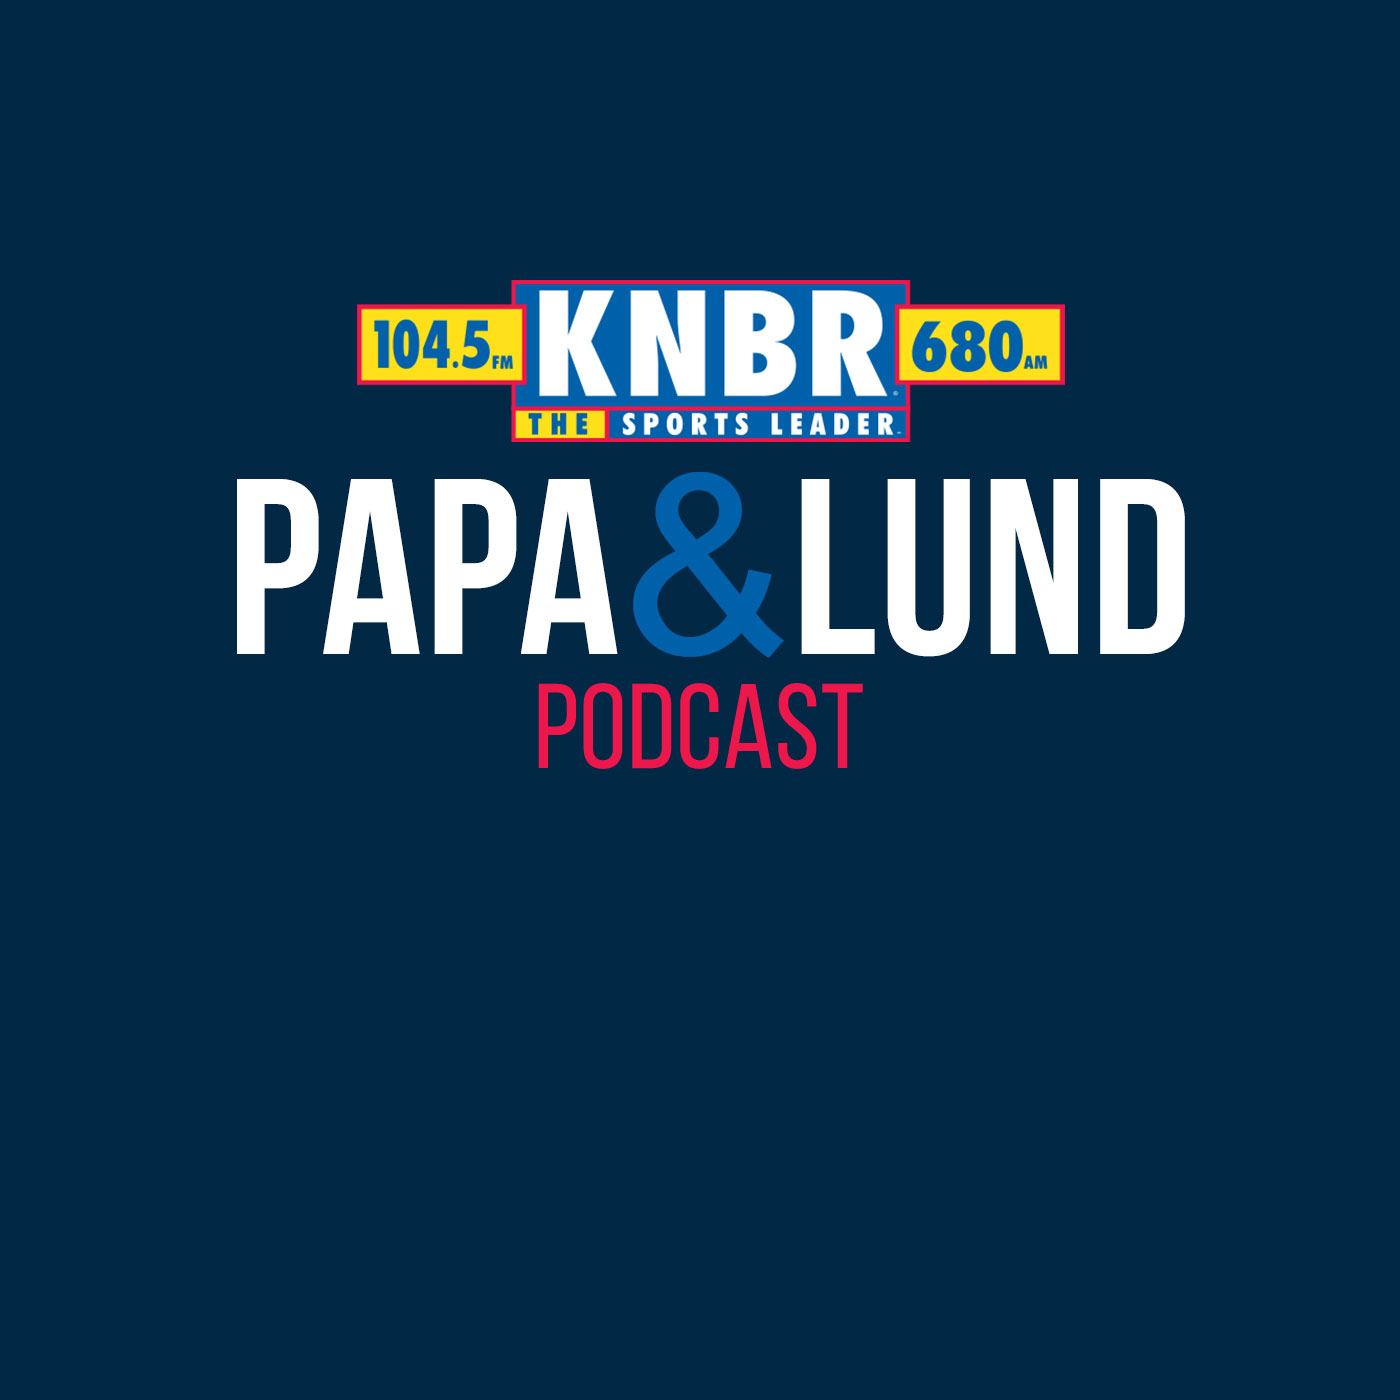 7-30 Andrew Baggarly joins Papa & Lund to assess what he's hearing about the possibility of trading Blake Snell and the Giants pivoting toward youth after dealing Jorge Soler